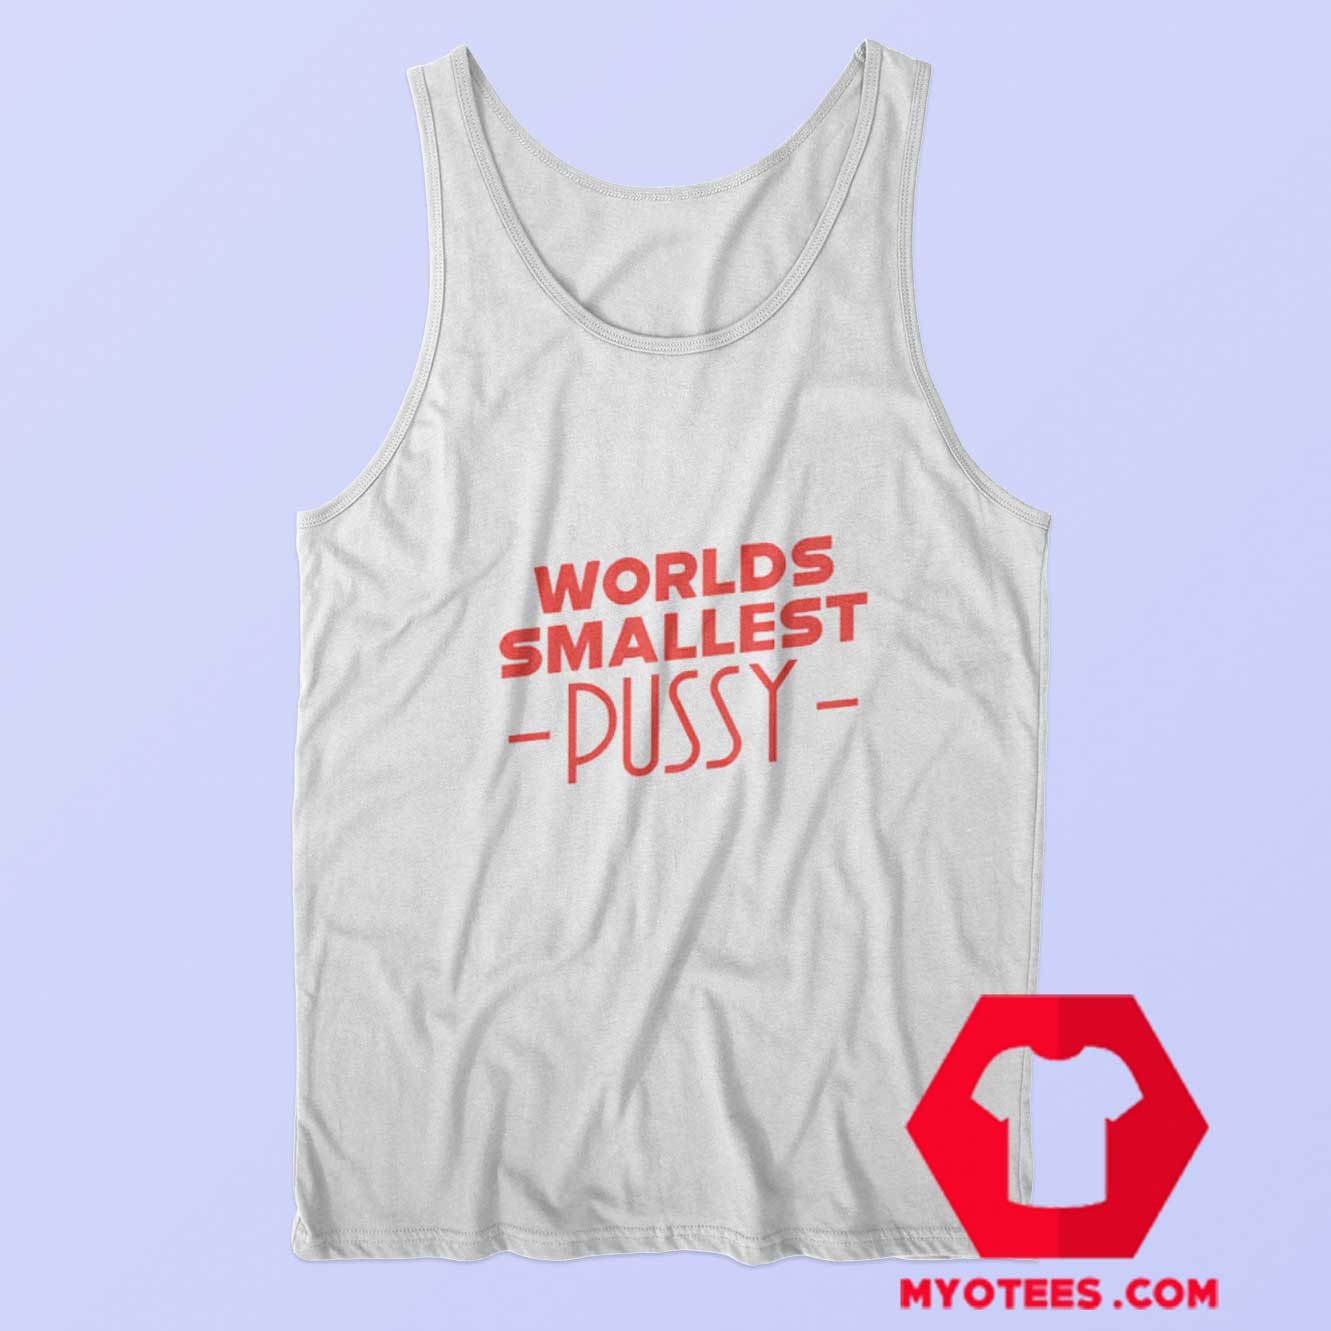 Worlds Smallest Pussy Graphic Tank Top On Sale Myotees